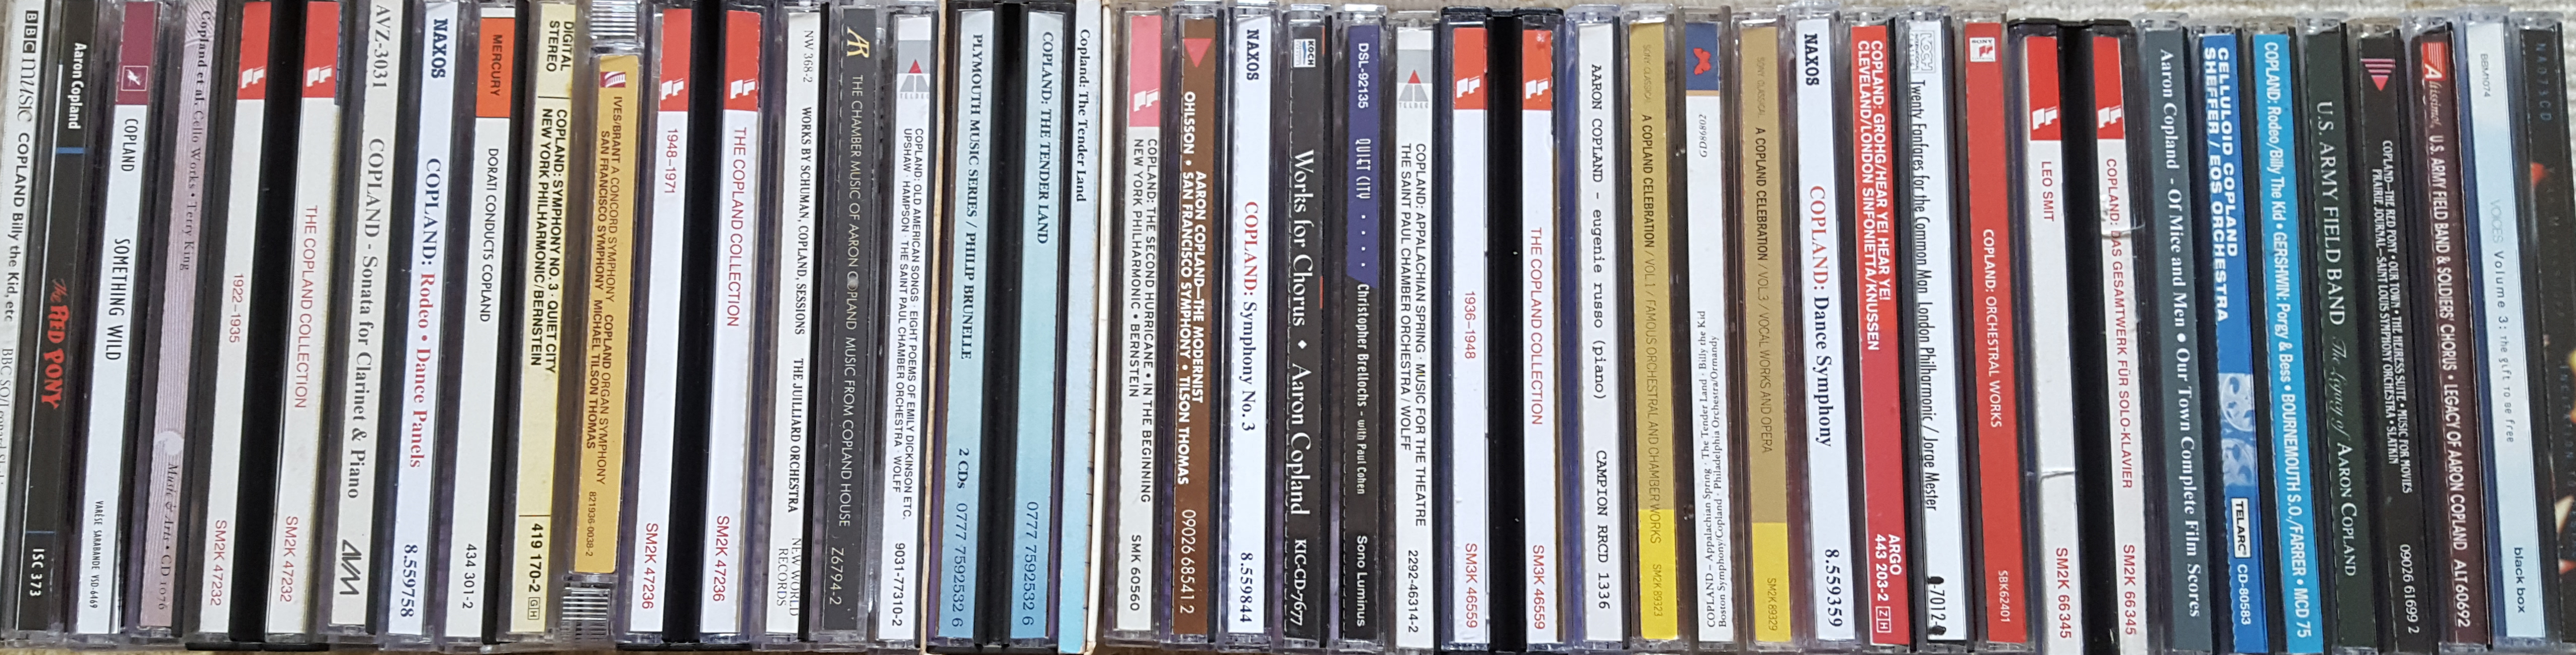 CD library of Copland recordings